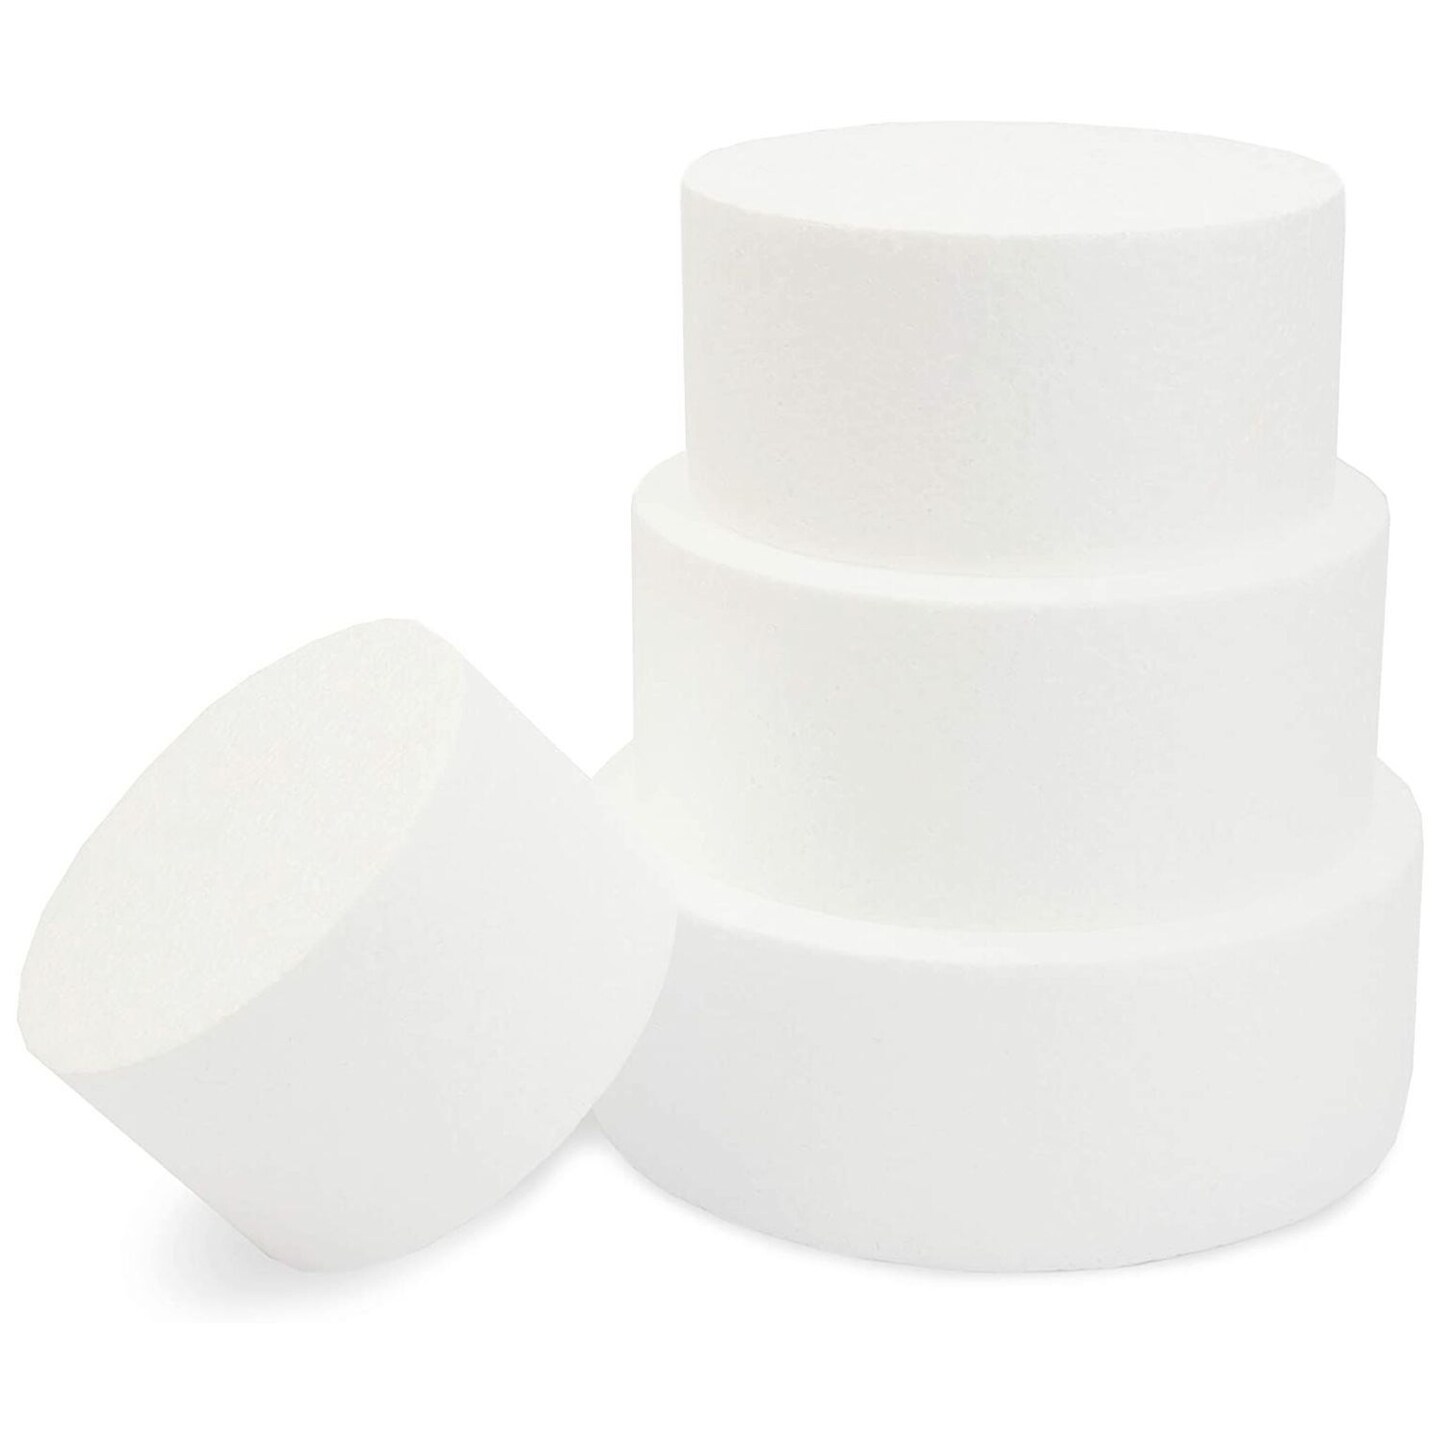 Round Foam Cake Dummy Set, 4 Tiers for Display, Arts and Crafts (White)